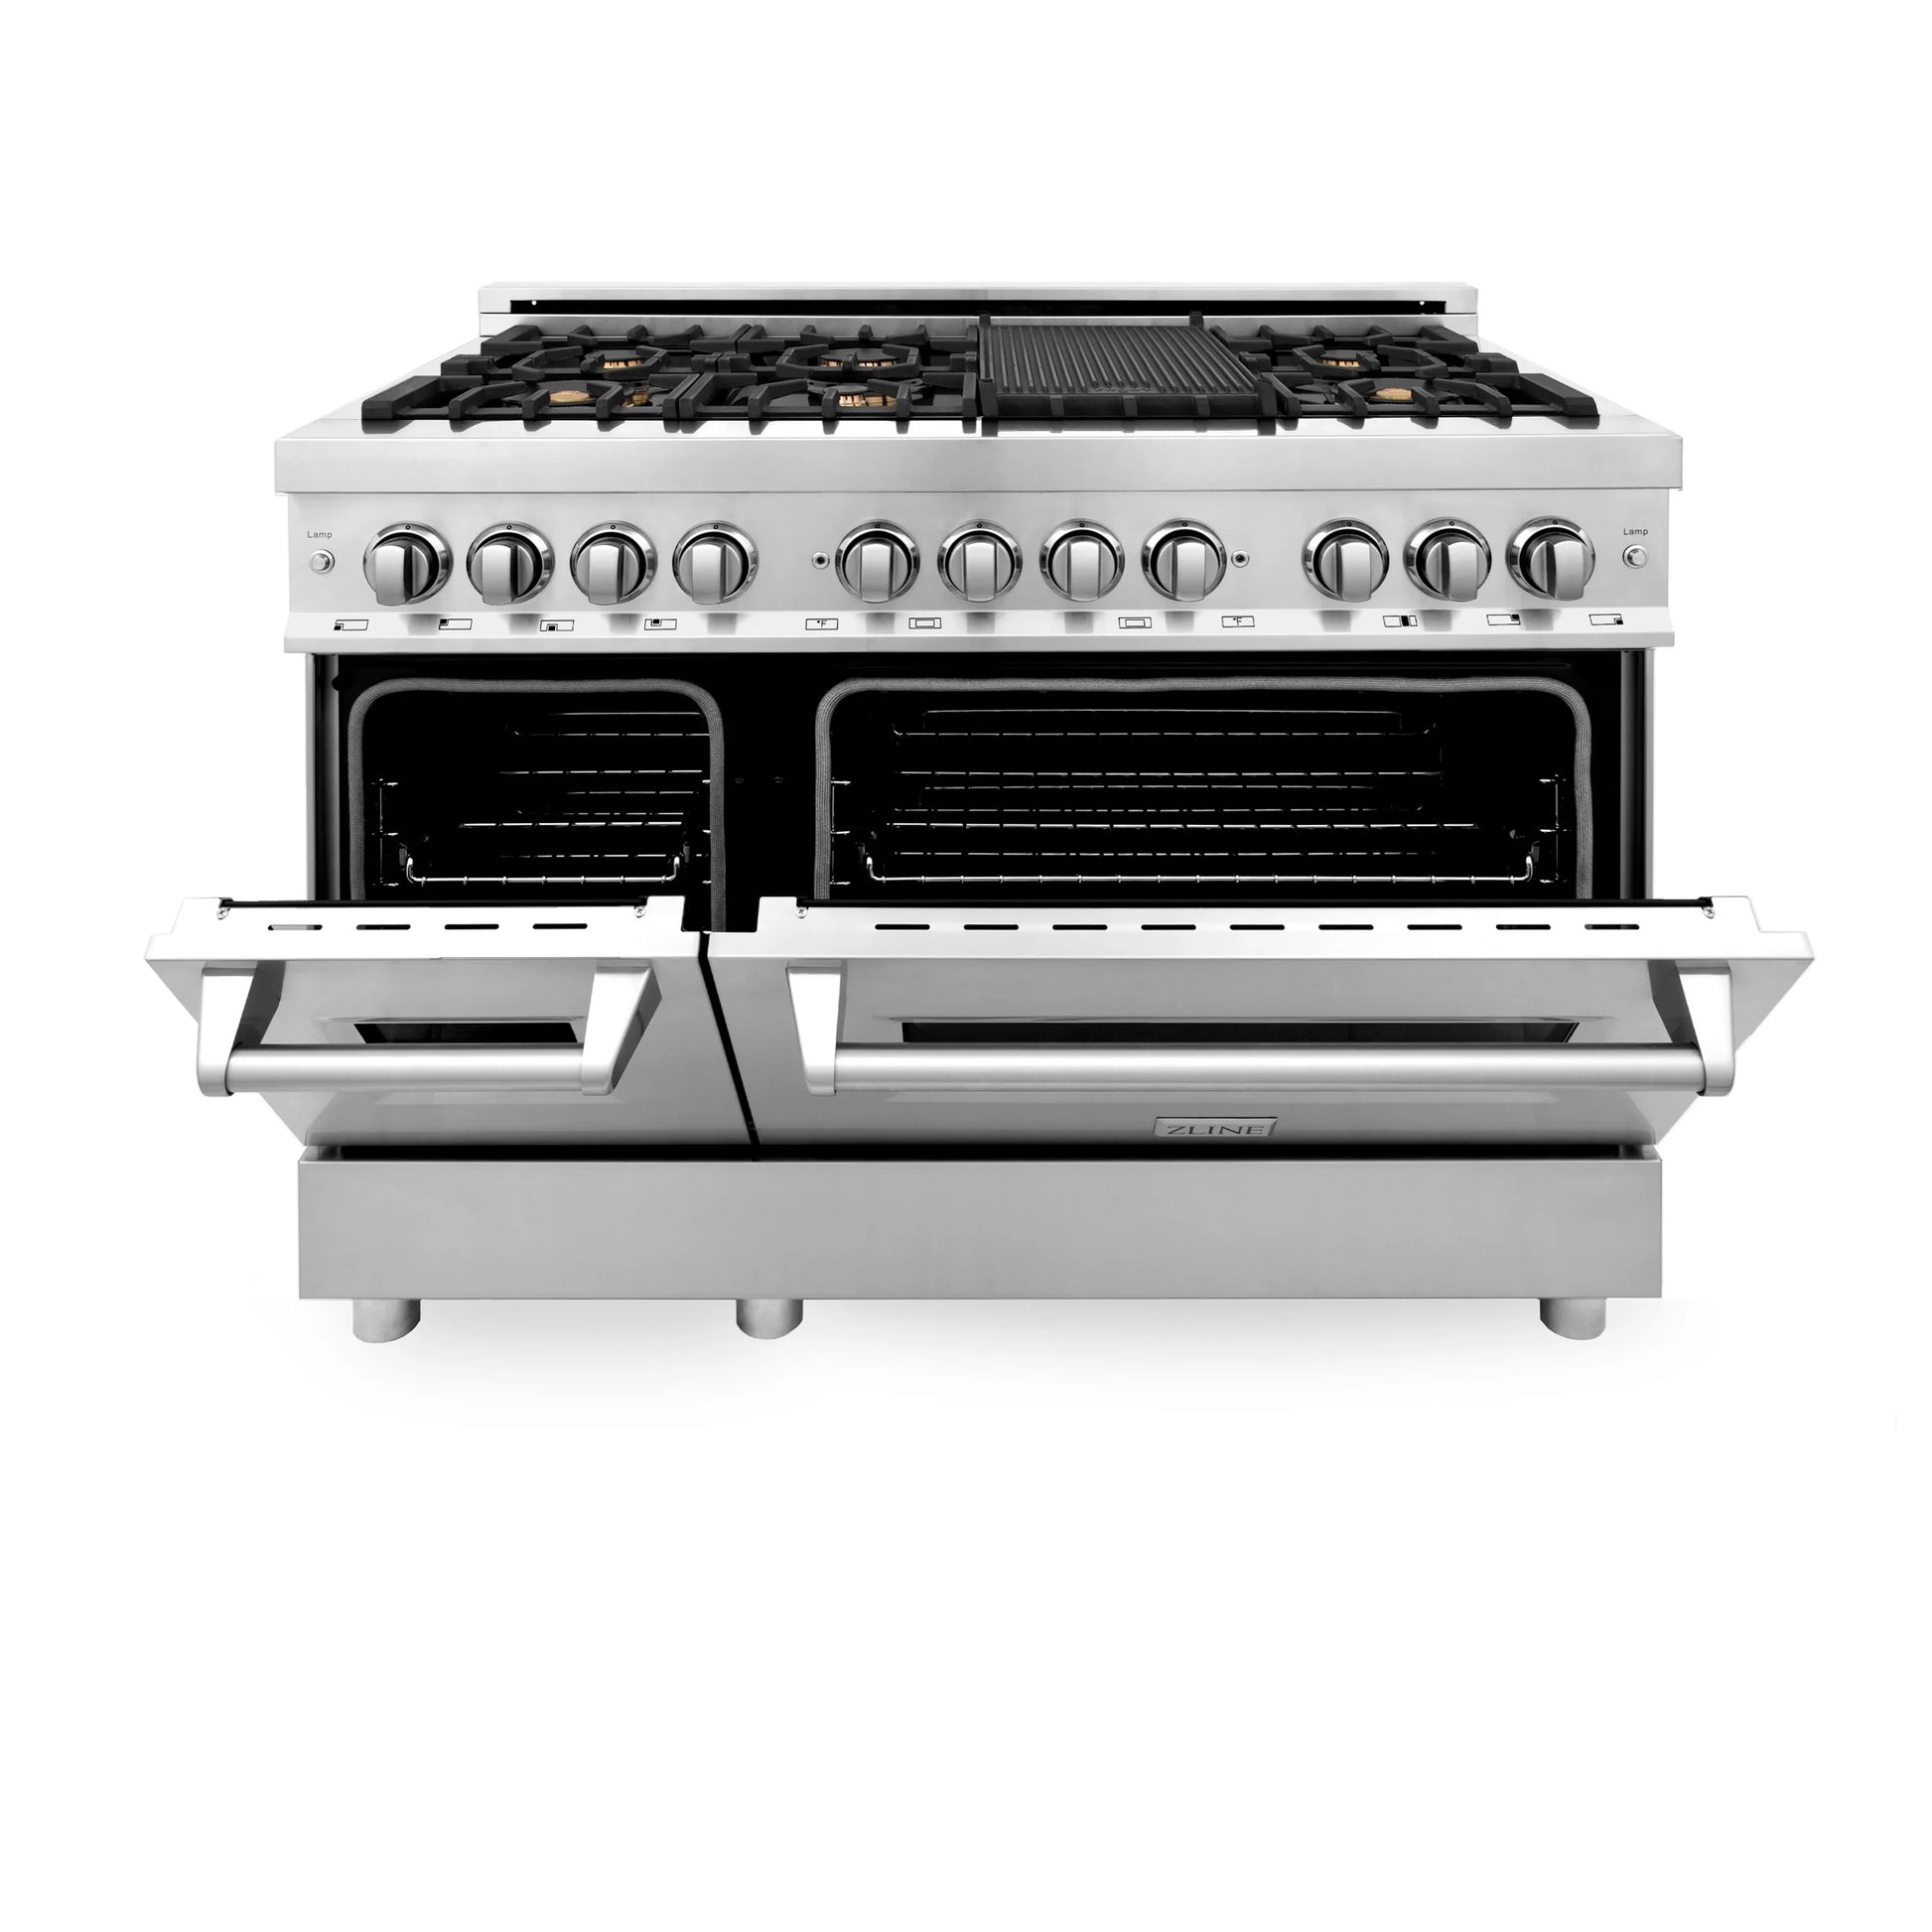 ZLINE 48" Dual Fuel Range - Stainless Steel with Brass Burners, Gas Stove, and Electric Oven